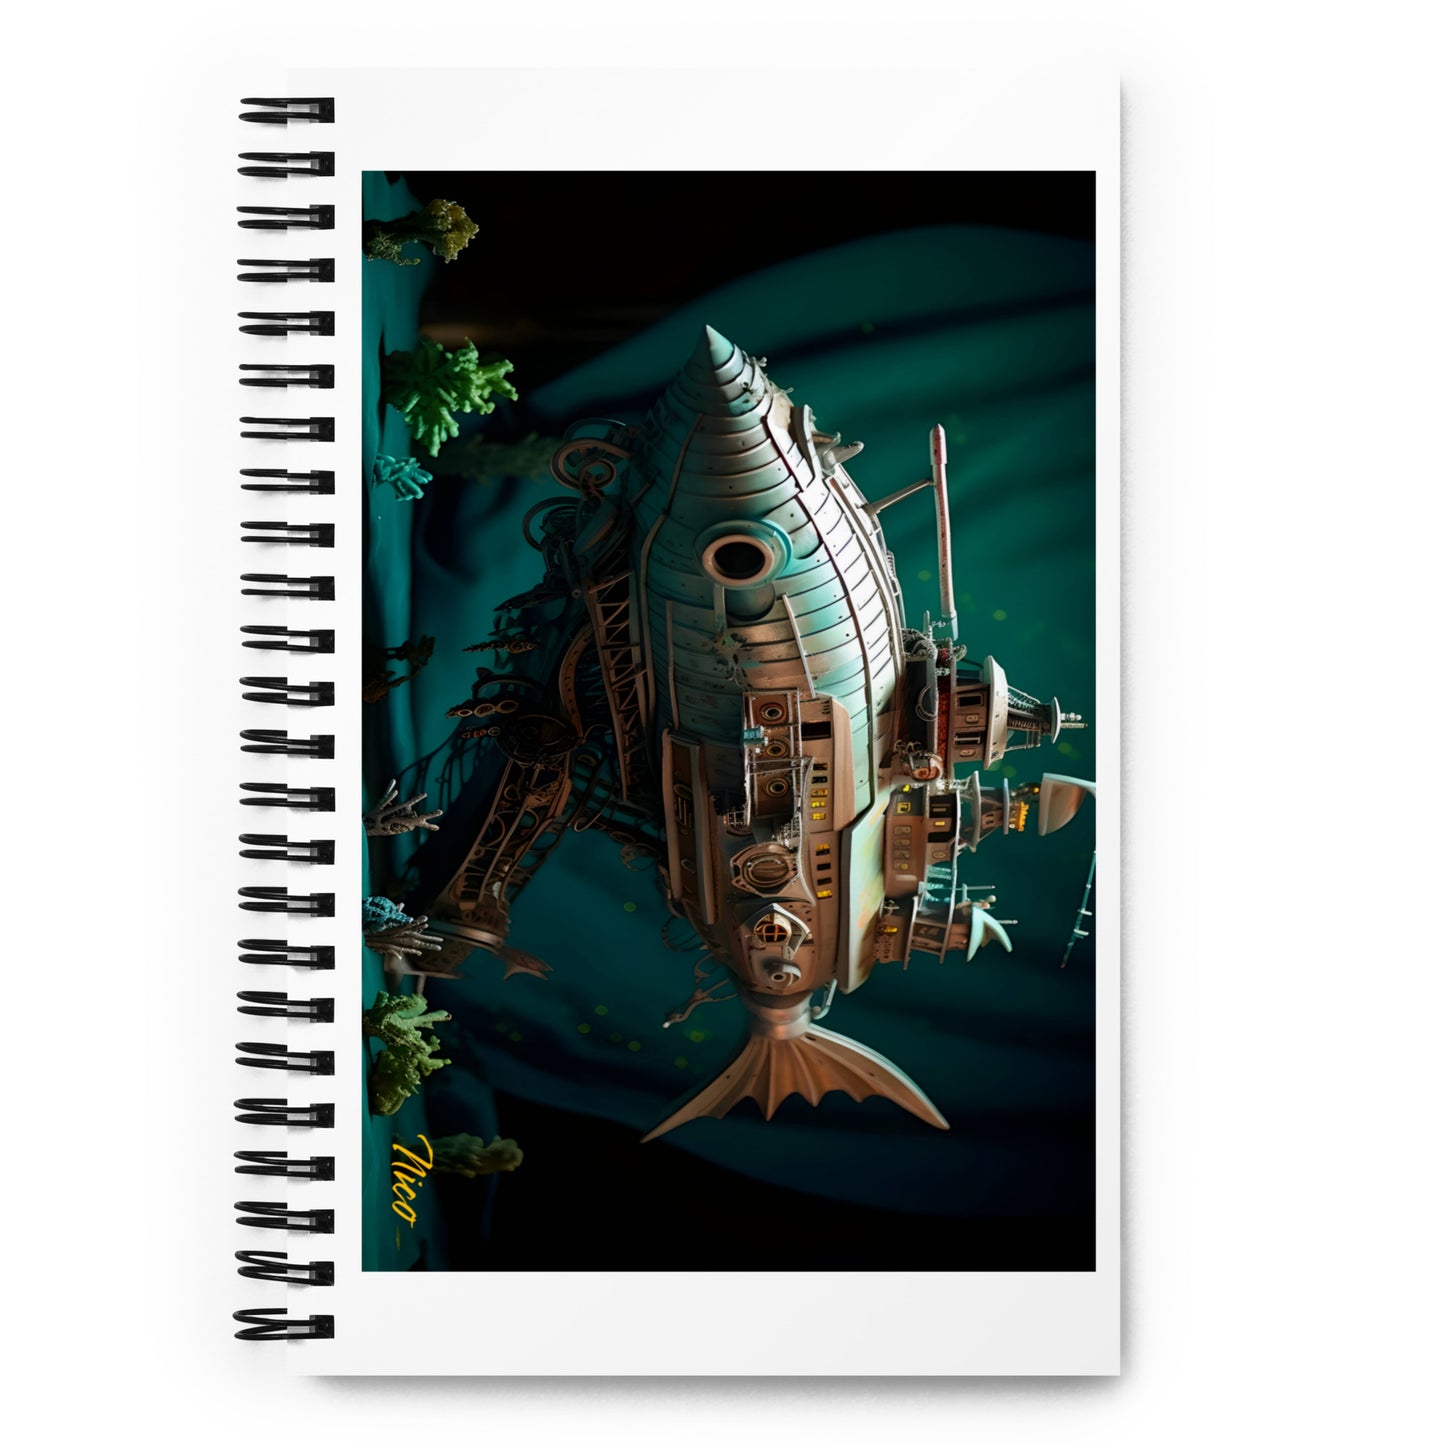 20,000 Leagues Under The Sea Series Print #2 - Spiral notebook